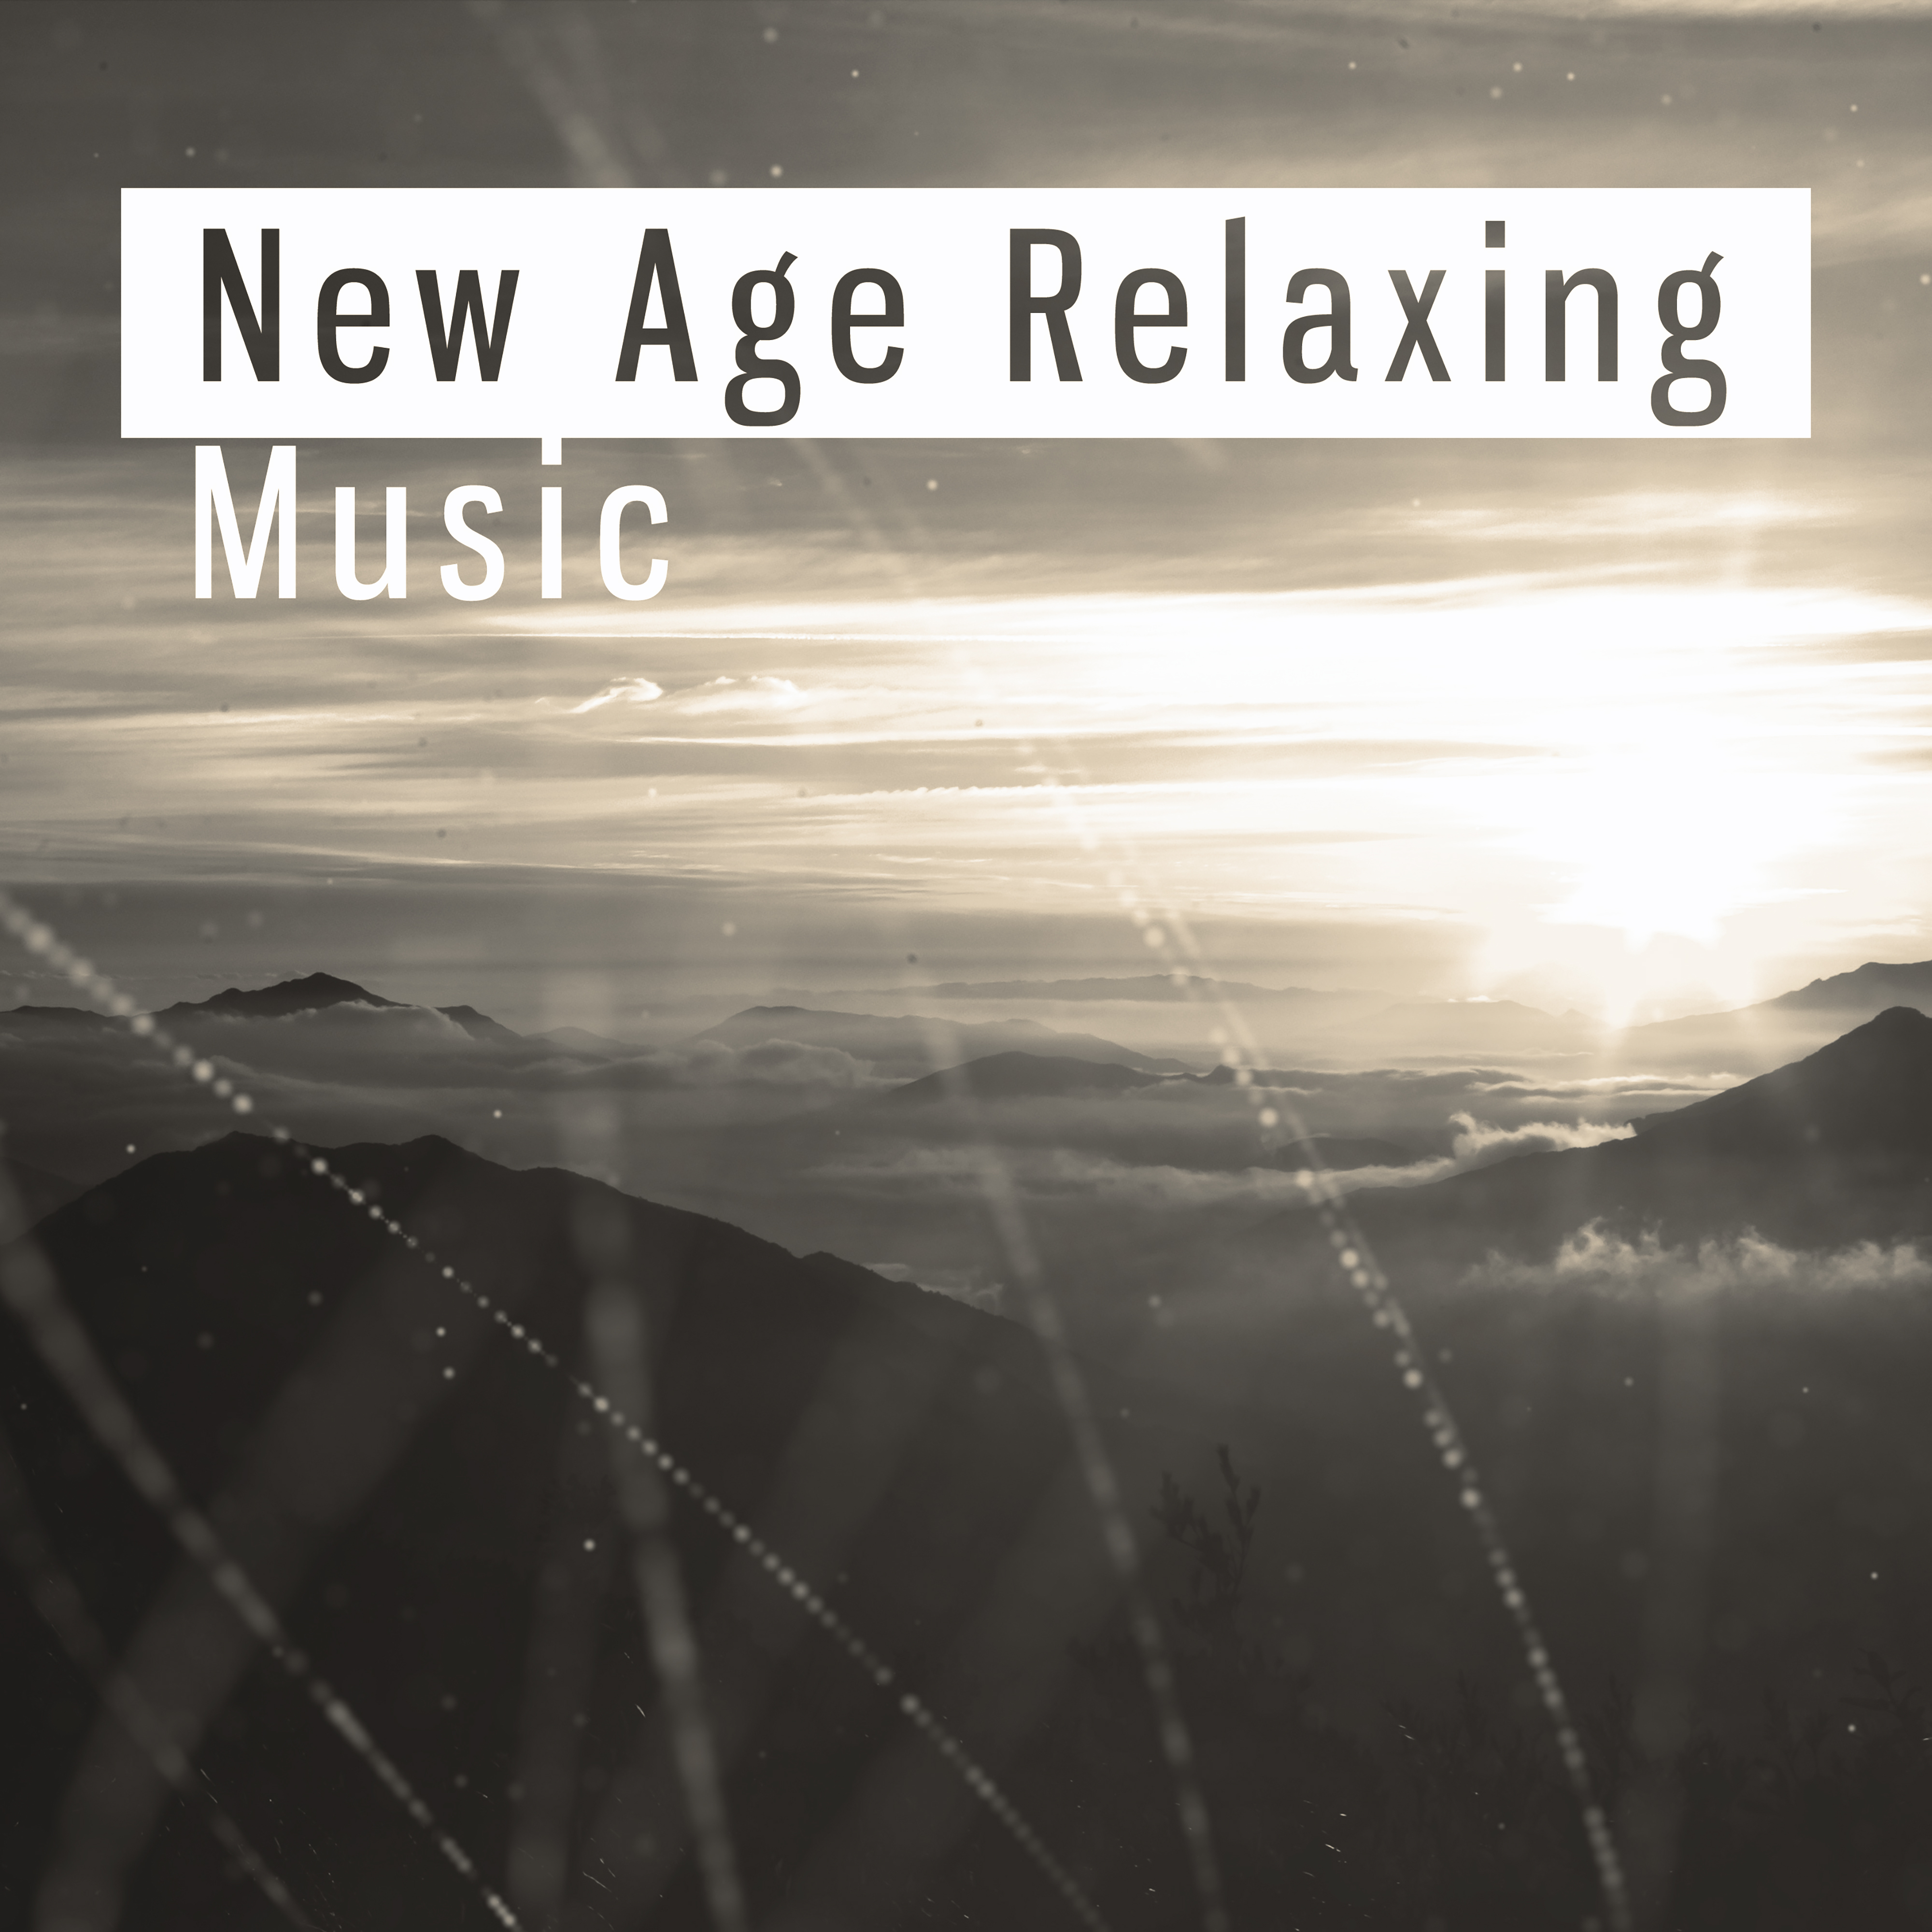 New Age Relaxing Music -  Serenity Nature Sounds, Just Relax, Rest, Spa  & Wellness, Massage Music